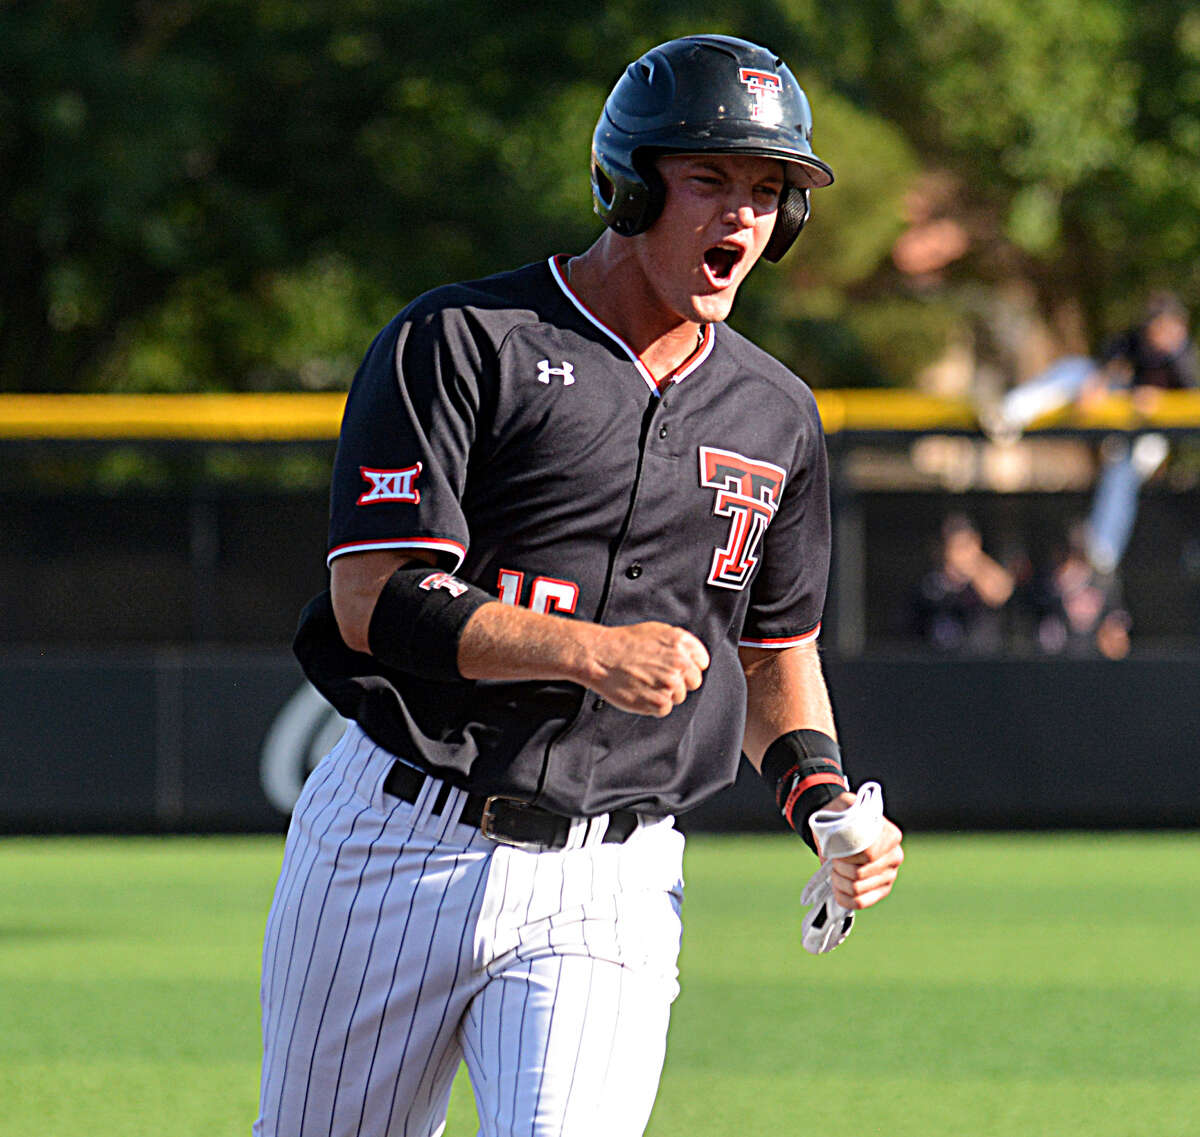 Texas Tech's Jung taken 8th overall in MLB Draft